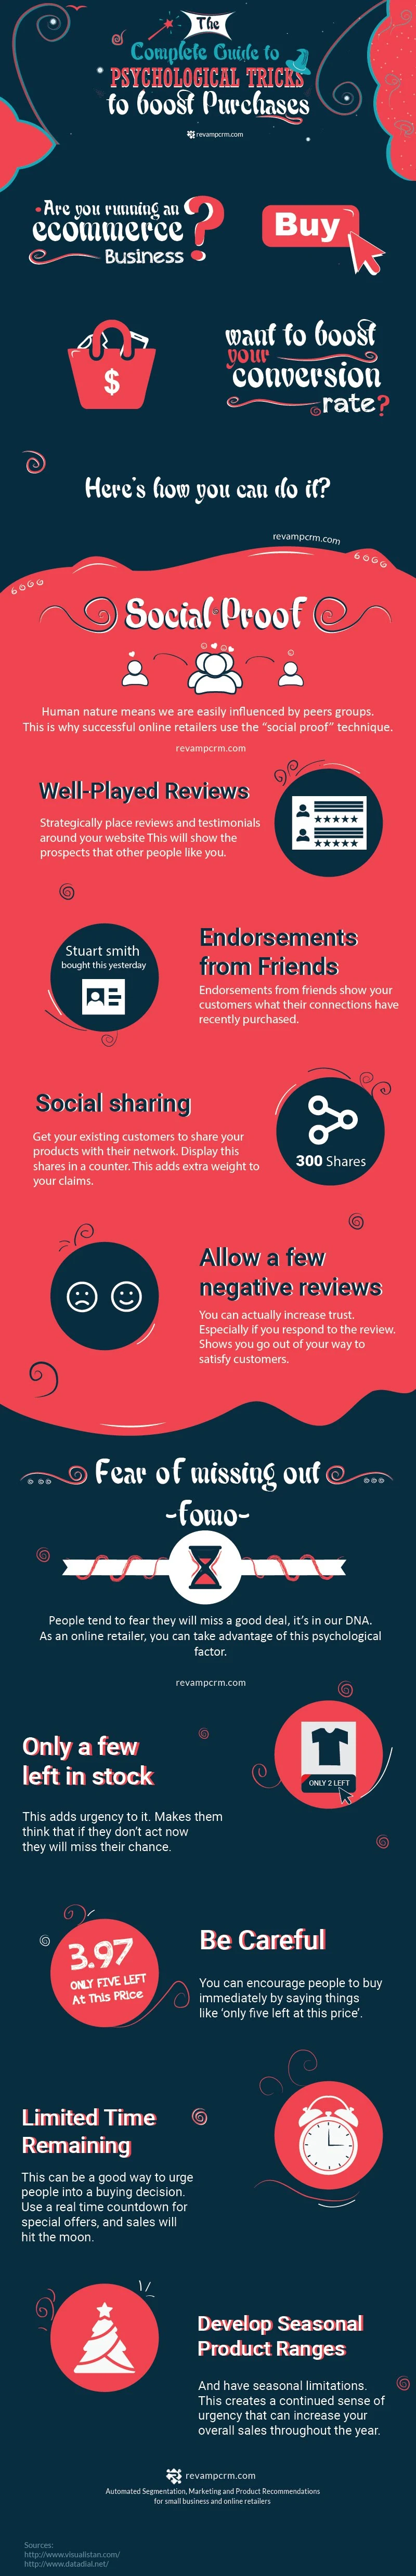 Psychological Tricks to Boost Purchases - #Infographic